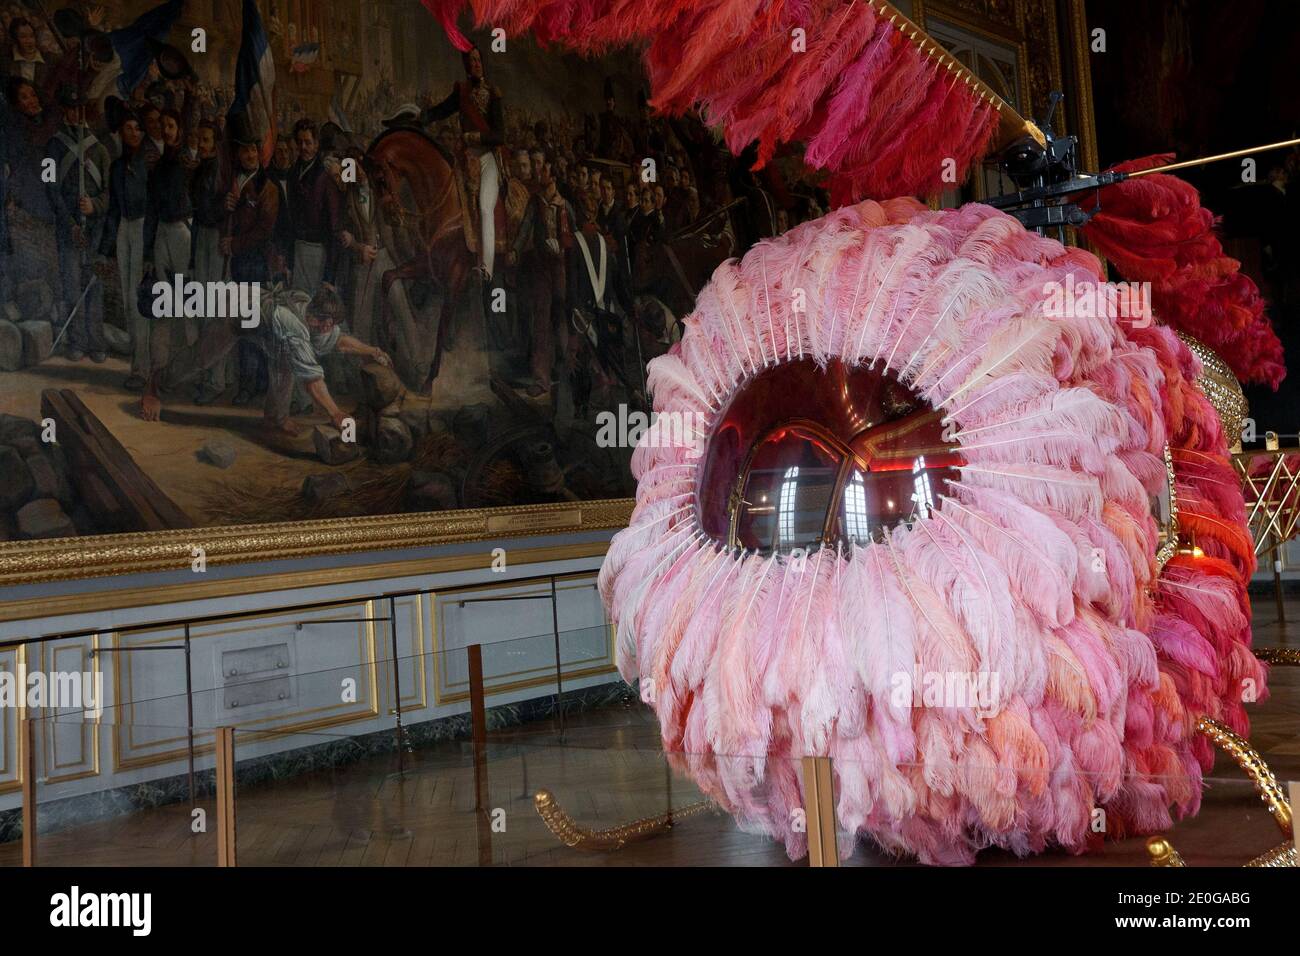 A picture taken on June 18, 2012 shows the work made with a Bell 47 helicopter, ostrich feathers and Swarovski crystals, 'Lilicoptere', by Portuguese contemporary art painter Joana Vasconcelos, at the Palace of Versailles, during a press visit of the exhibition 'Joana Vasconcelos Versailles', running from June 19 to September 30, 2012. Vasconcelos will be the first woman and the youngest artist to show her work in the setting of Versailles. Photo by Stephane Lemouton/ABACAPRESS.COM. Stock Photo